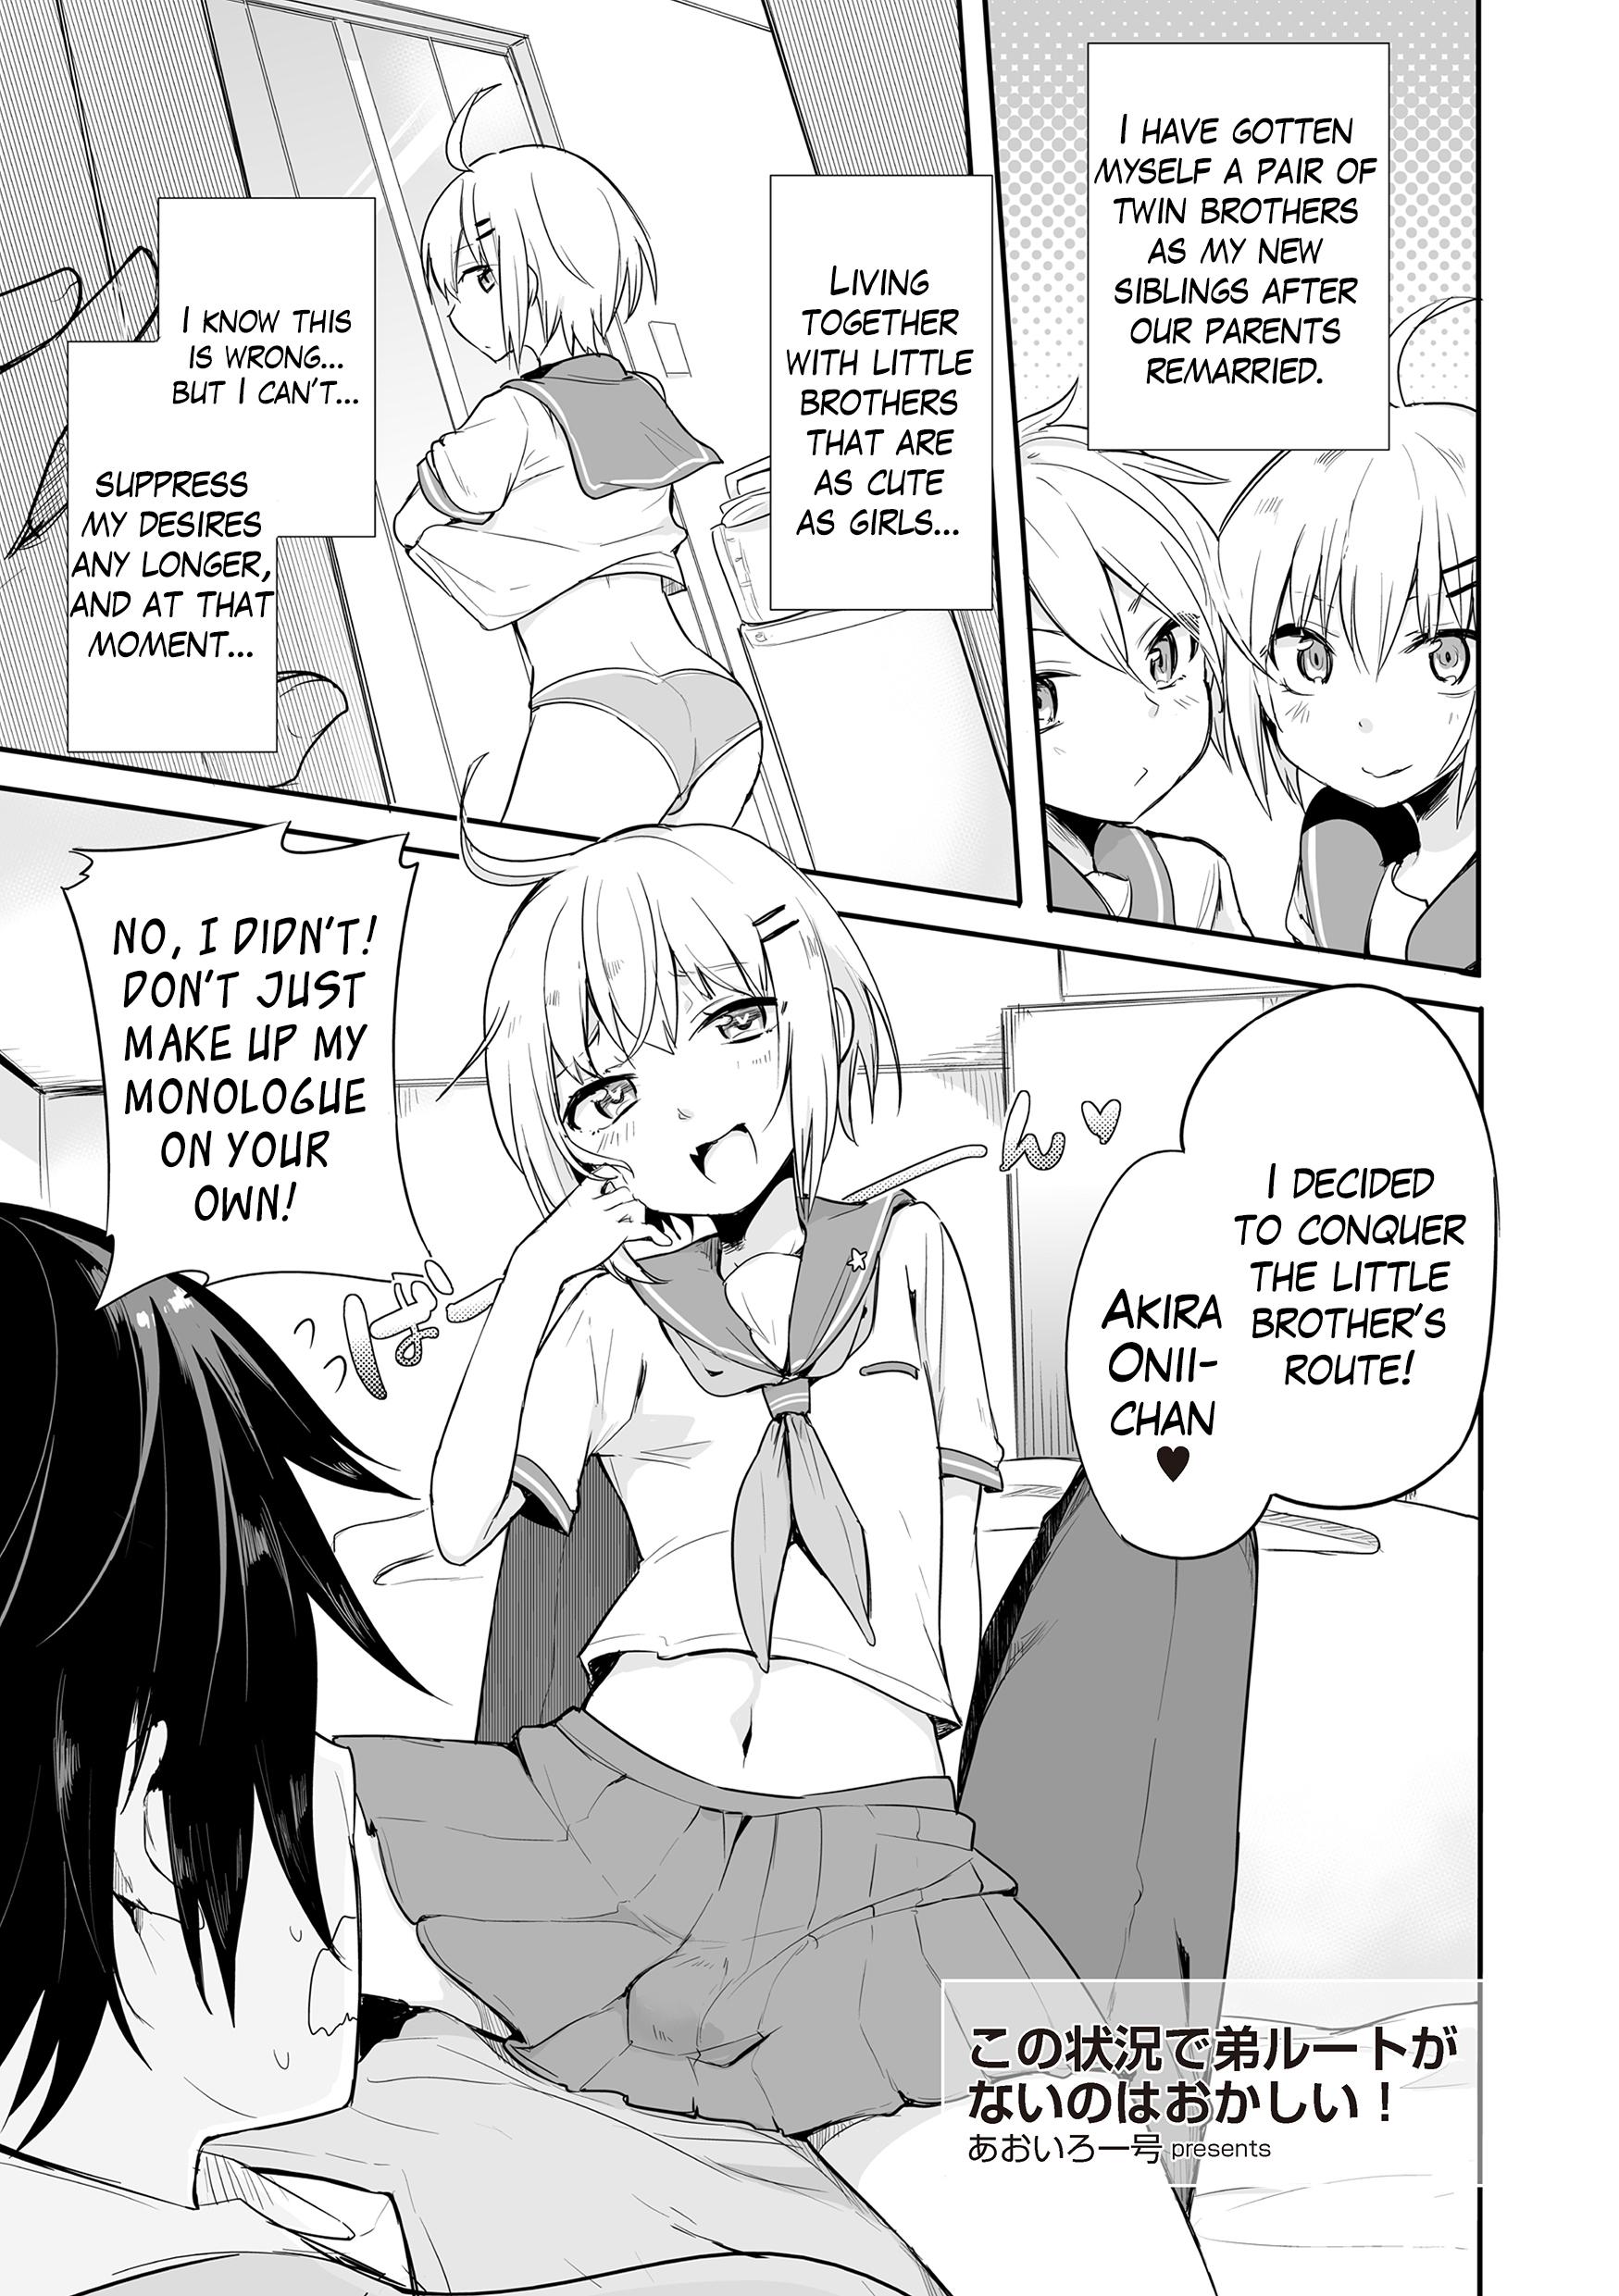 Ano Kono Joukyou de Otouto Route ga nai no wa Okashii! | This Situation is too Weird for it not to be a Little Brother’s Route! Webcamsex - Page 2